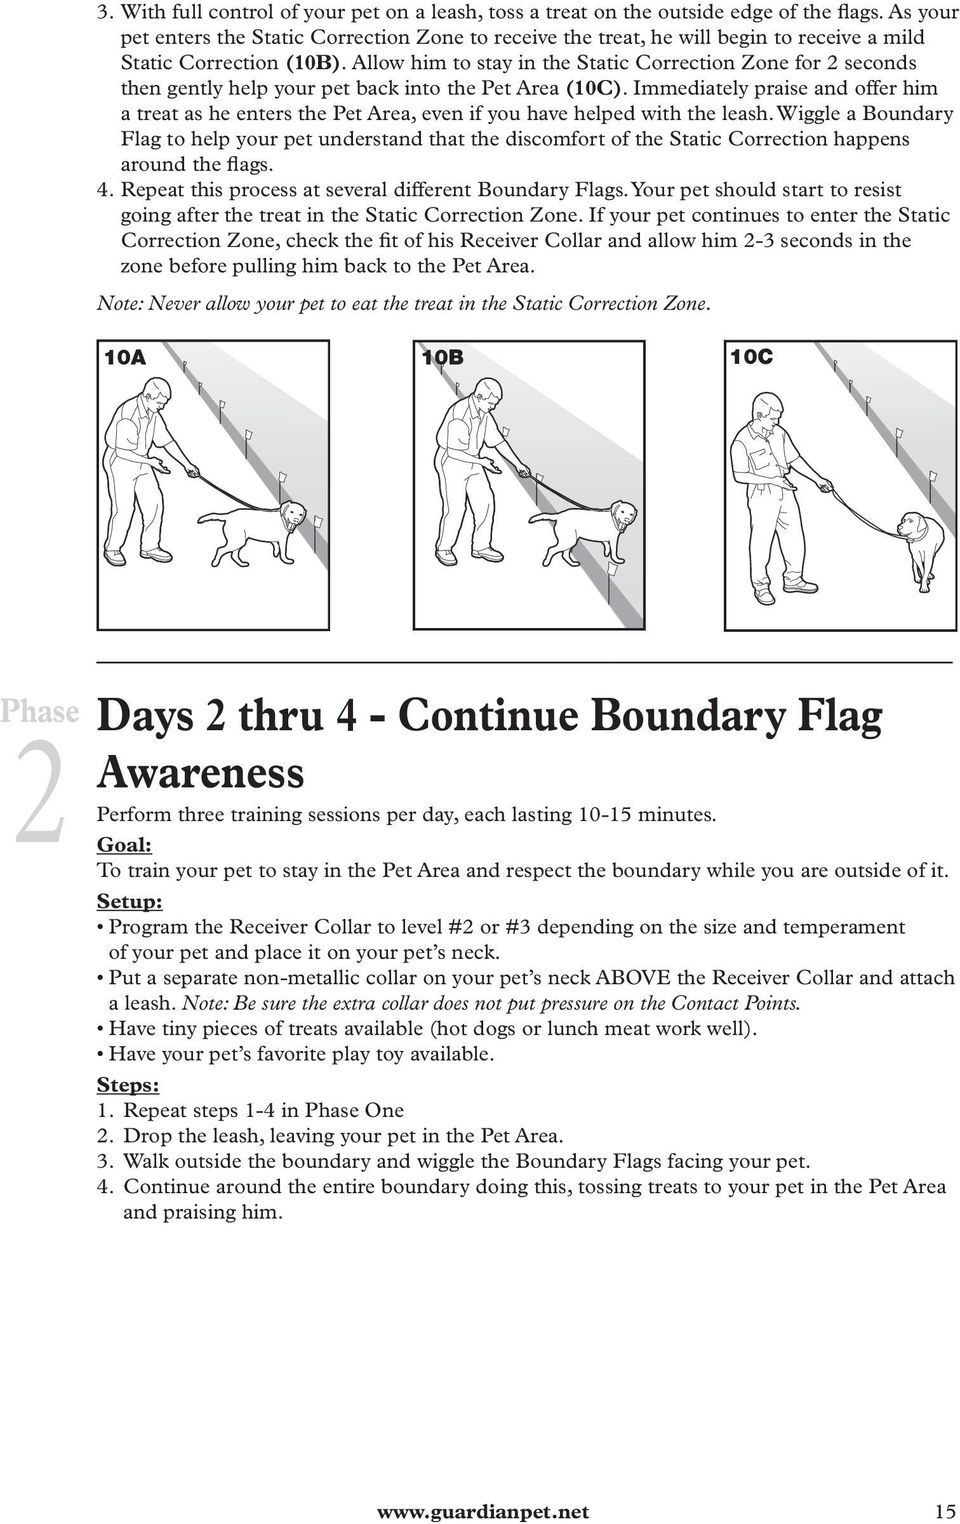 Allow him to stay in the Static Correction Zone for 2 seconds then gently help your pet back into the Pet Area (10C).